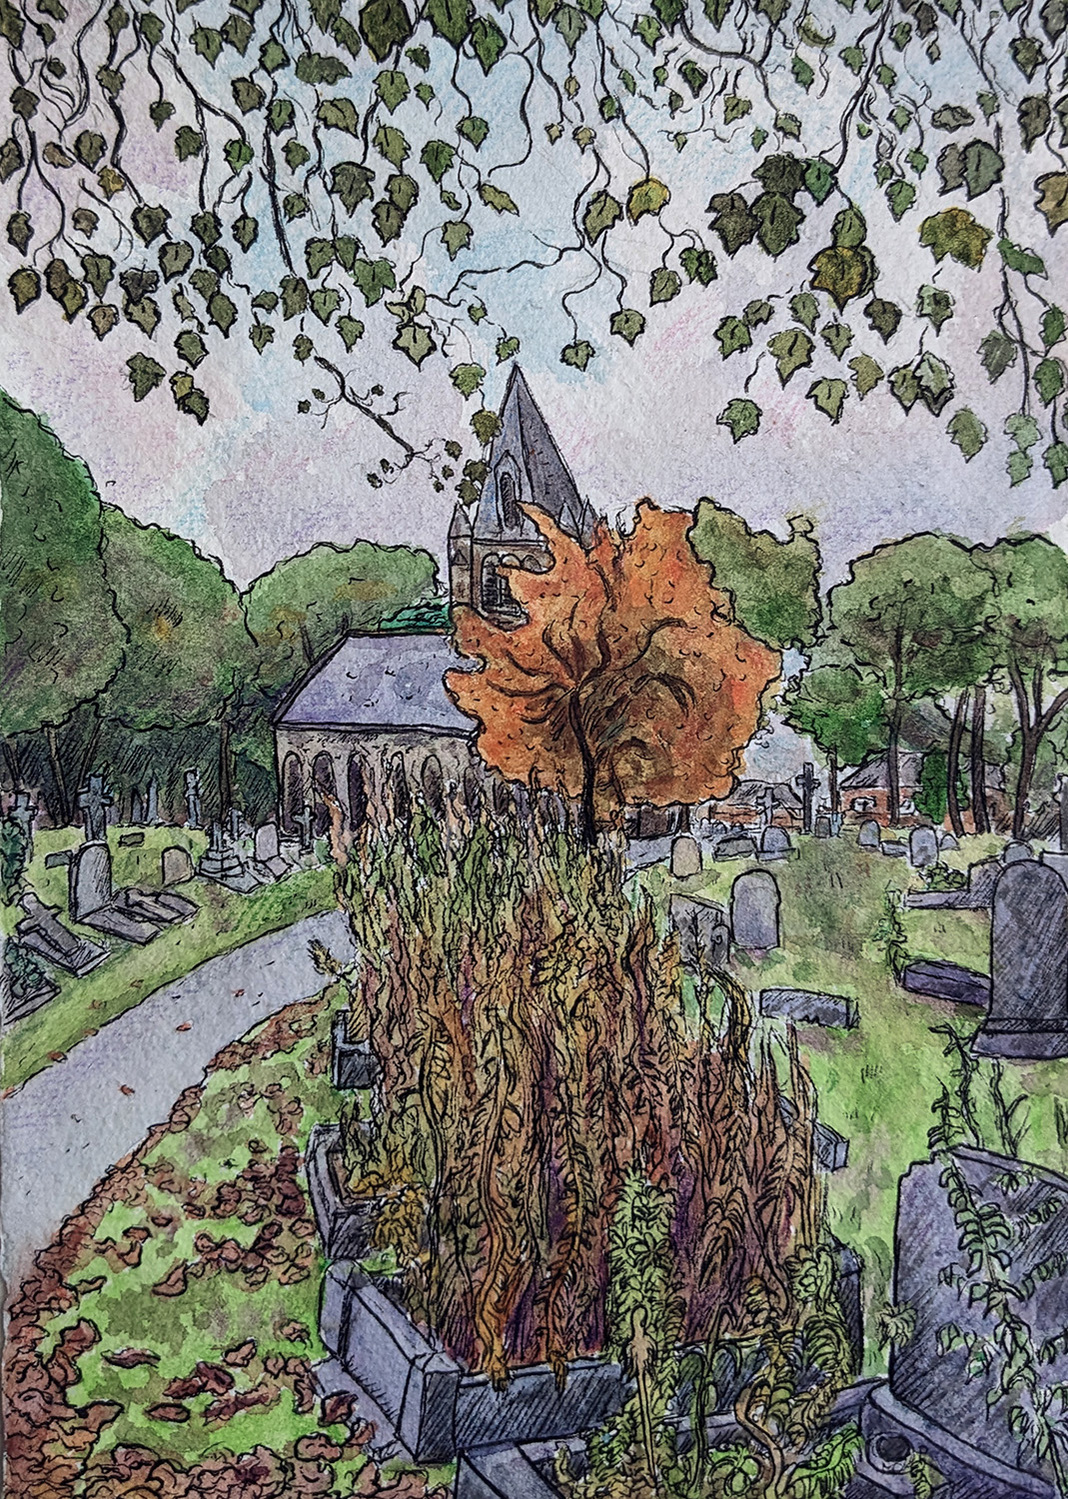 A chapel in a graveyard or cemetery with a single orange tree in front of it. The graves have plants growing from them. A path leads to the church and just past it. The sky is cloudy. The top of the image has leaves and branches framing the top. 